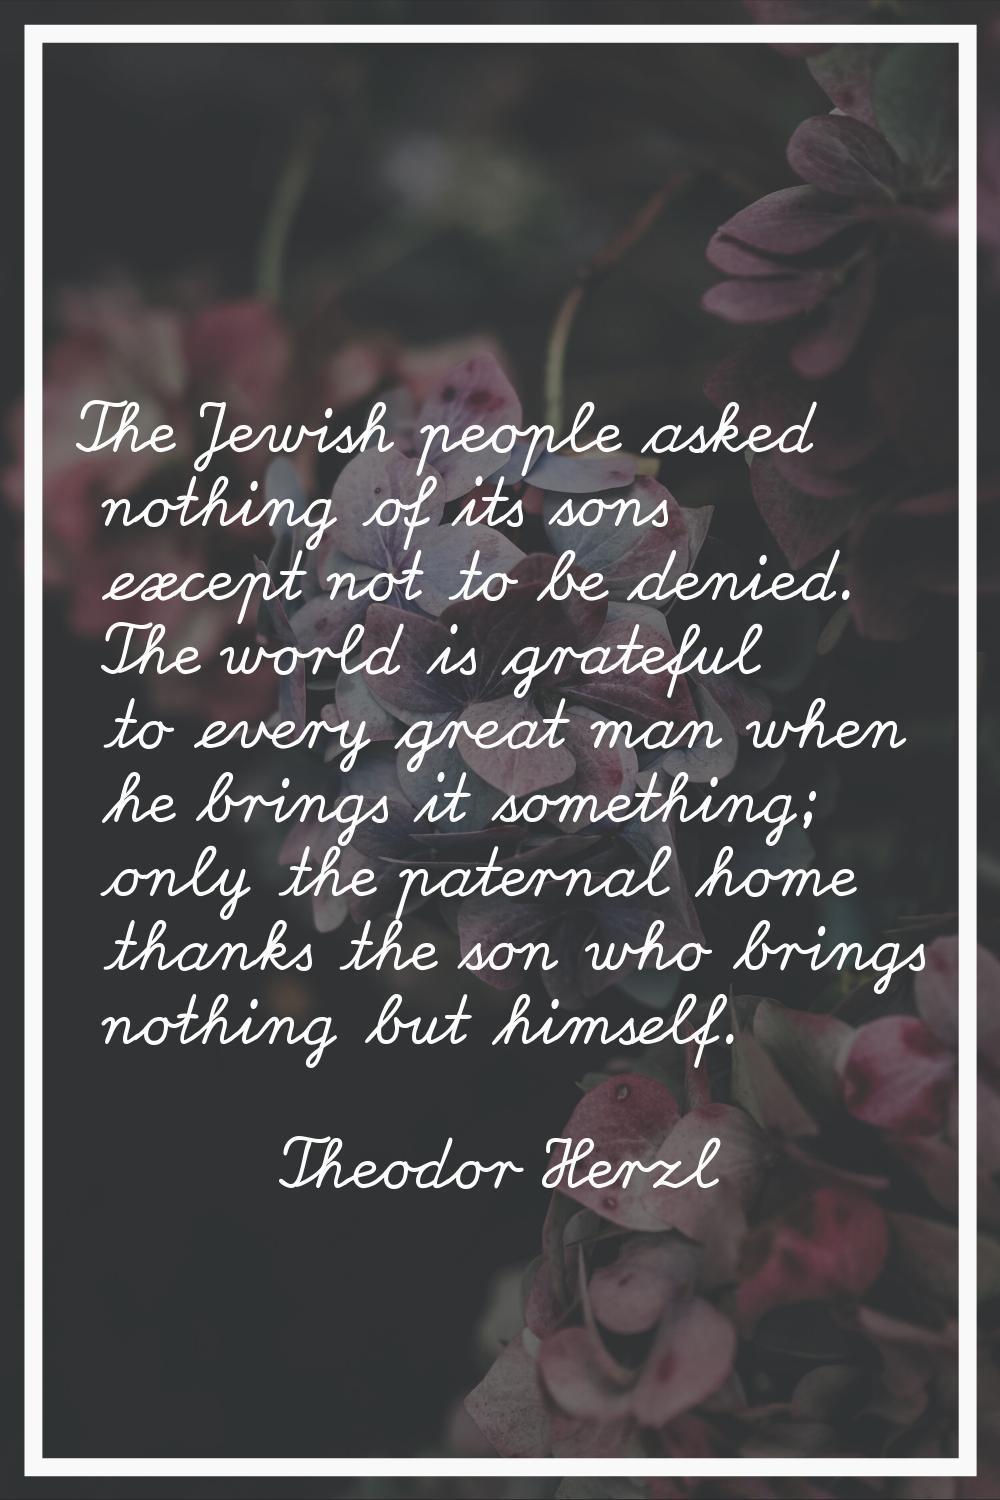 The Jewish people asked nothing of its sons except not to be denied. The world is grateful to every